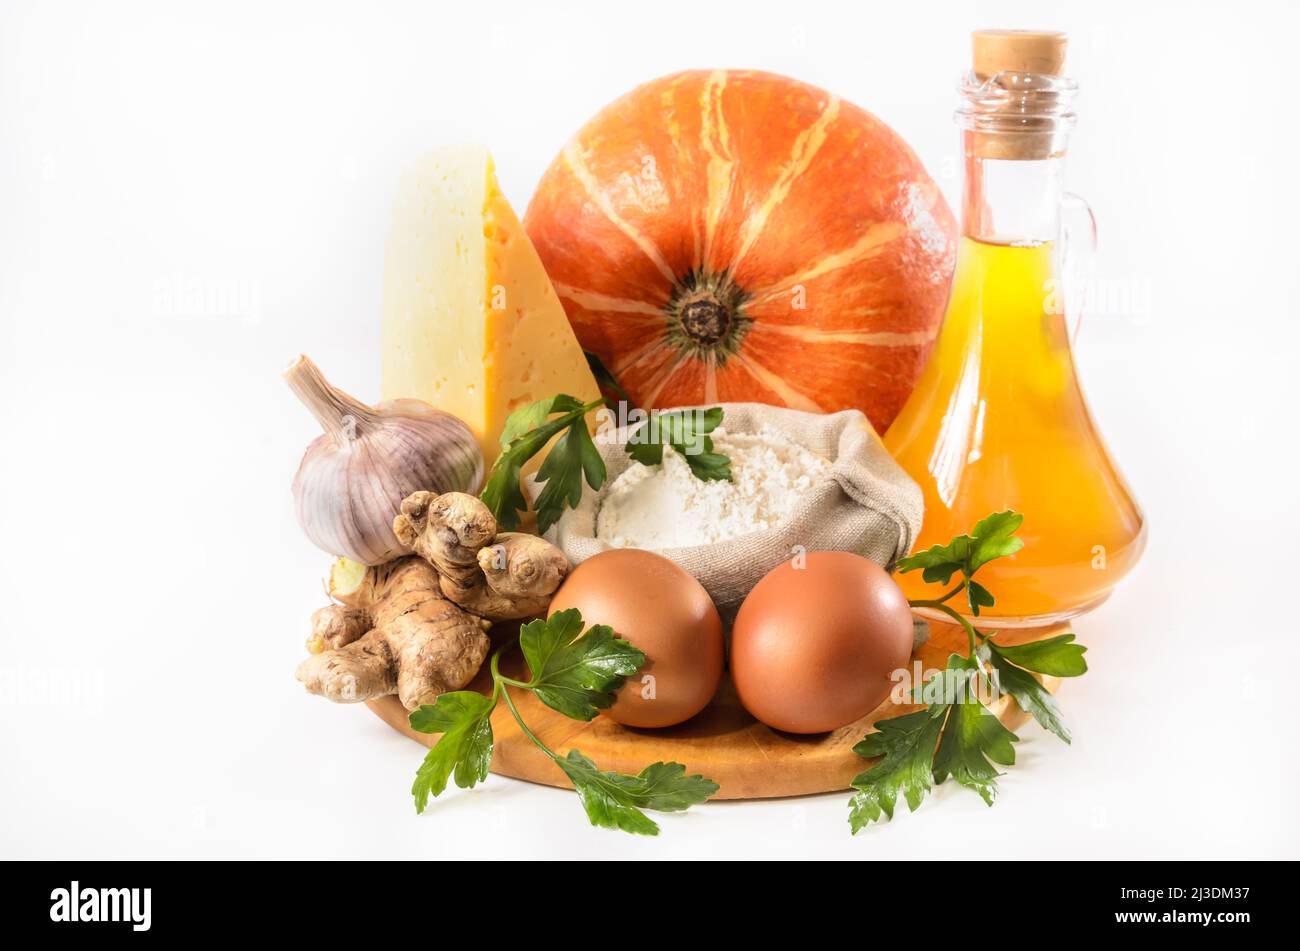 pumpkin and other ingredients for pumpkin casserole on a light background Stock Photo